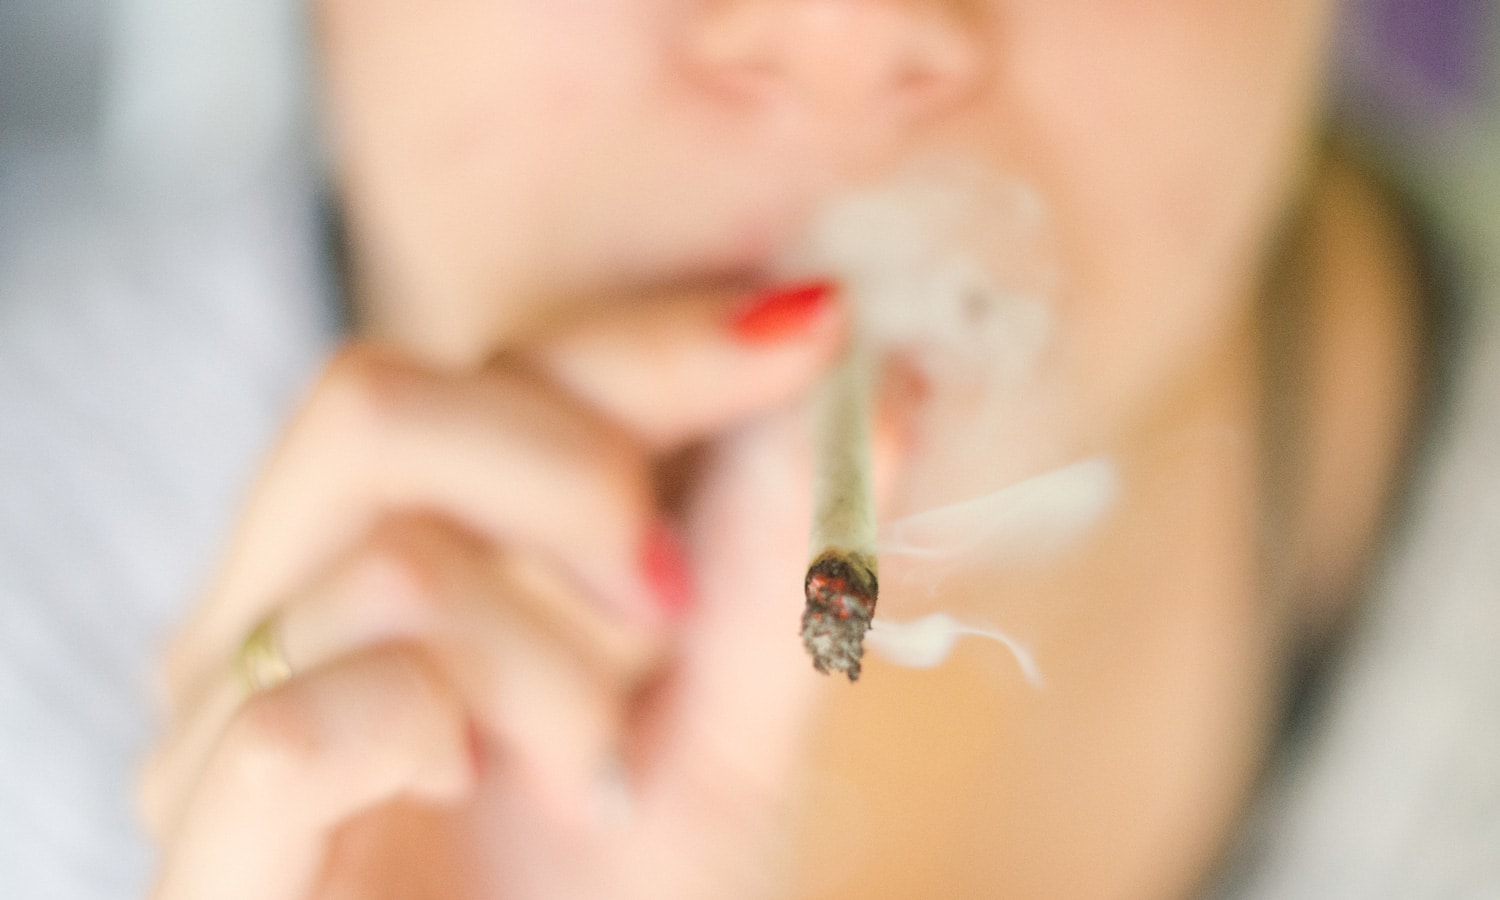 Marijuana Does Not Make You Dumber, According to Science